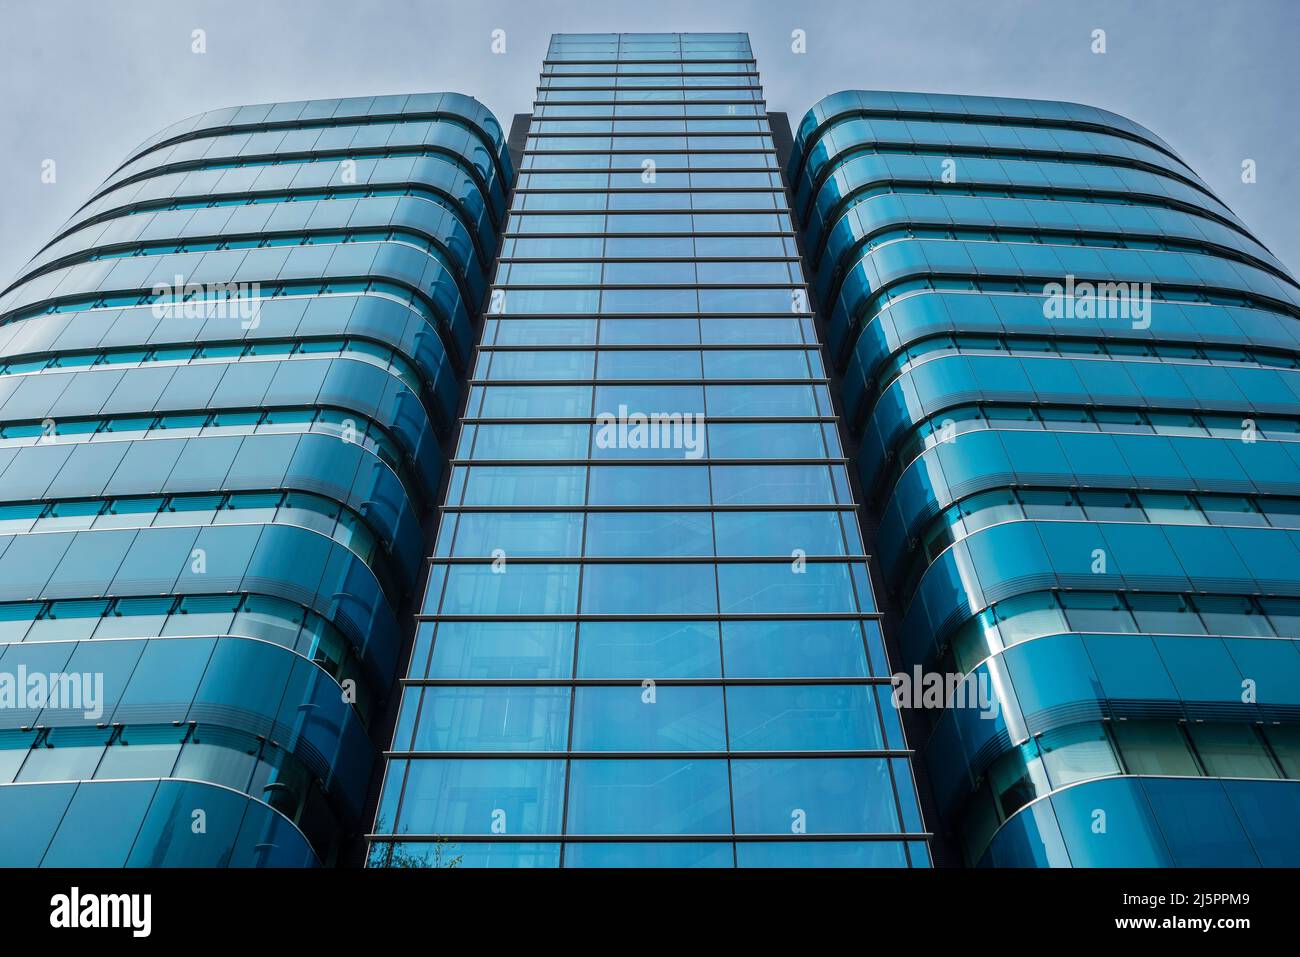 Blue glass clad tower block in a modern business development. Central business district. City of London. Stock Photo